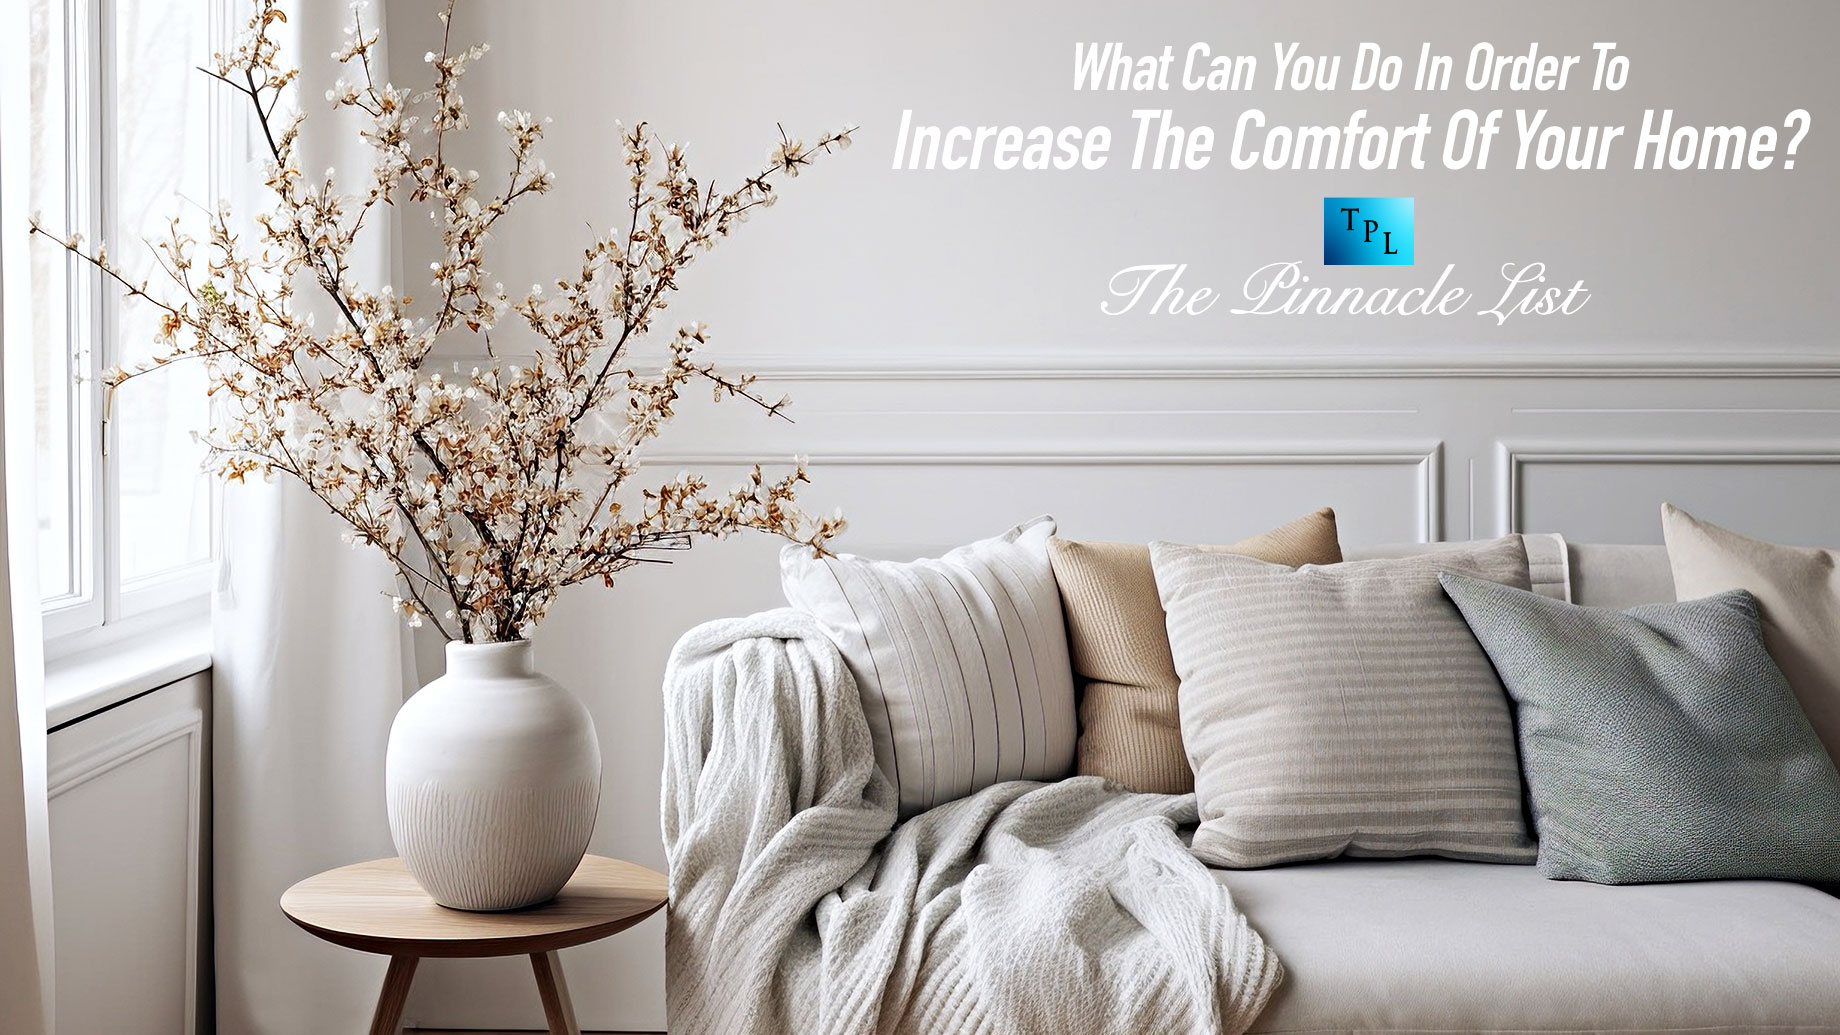 What Can You Do In Order To Increase The Comfort Of Your Home?